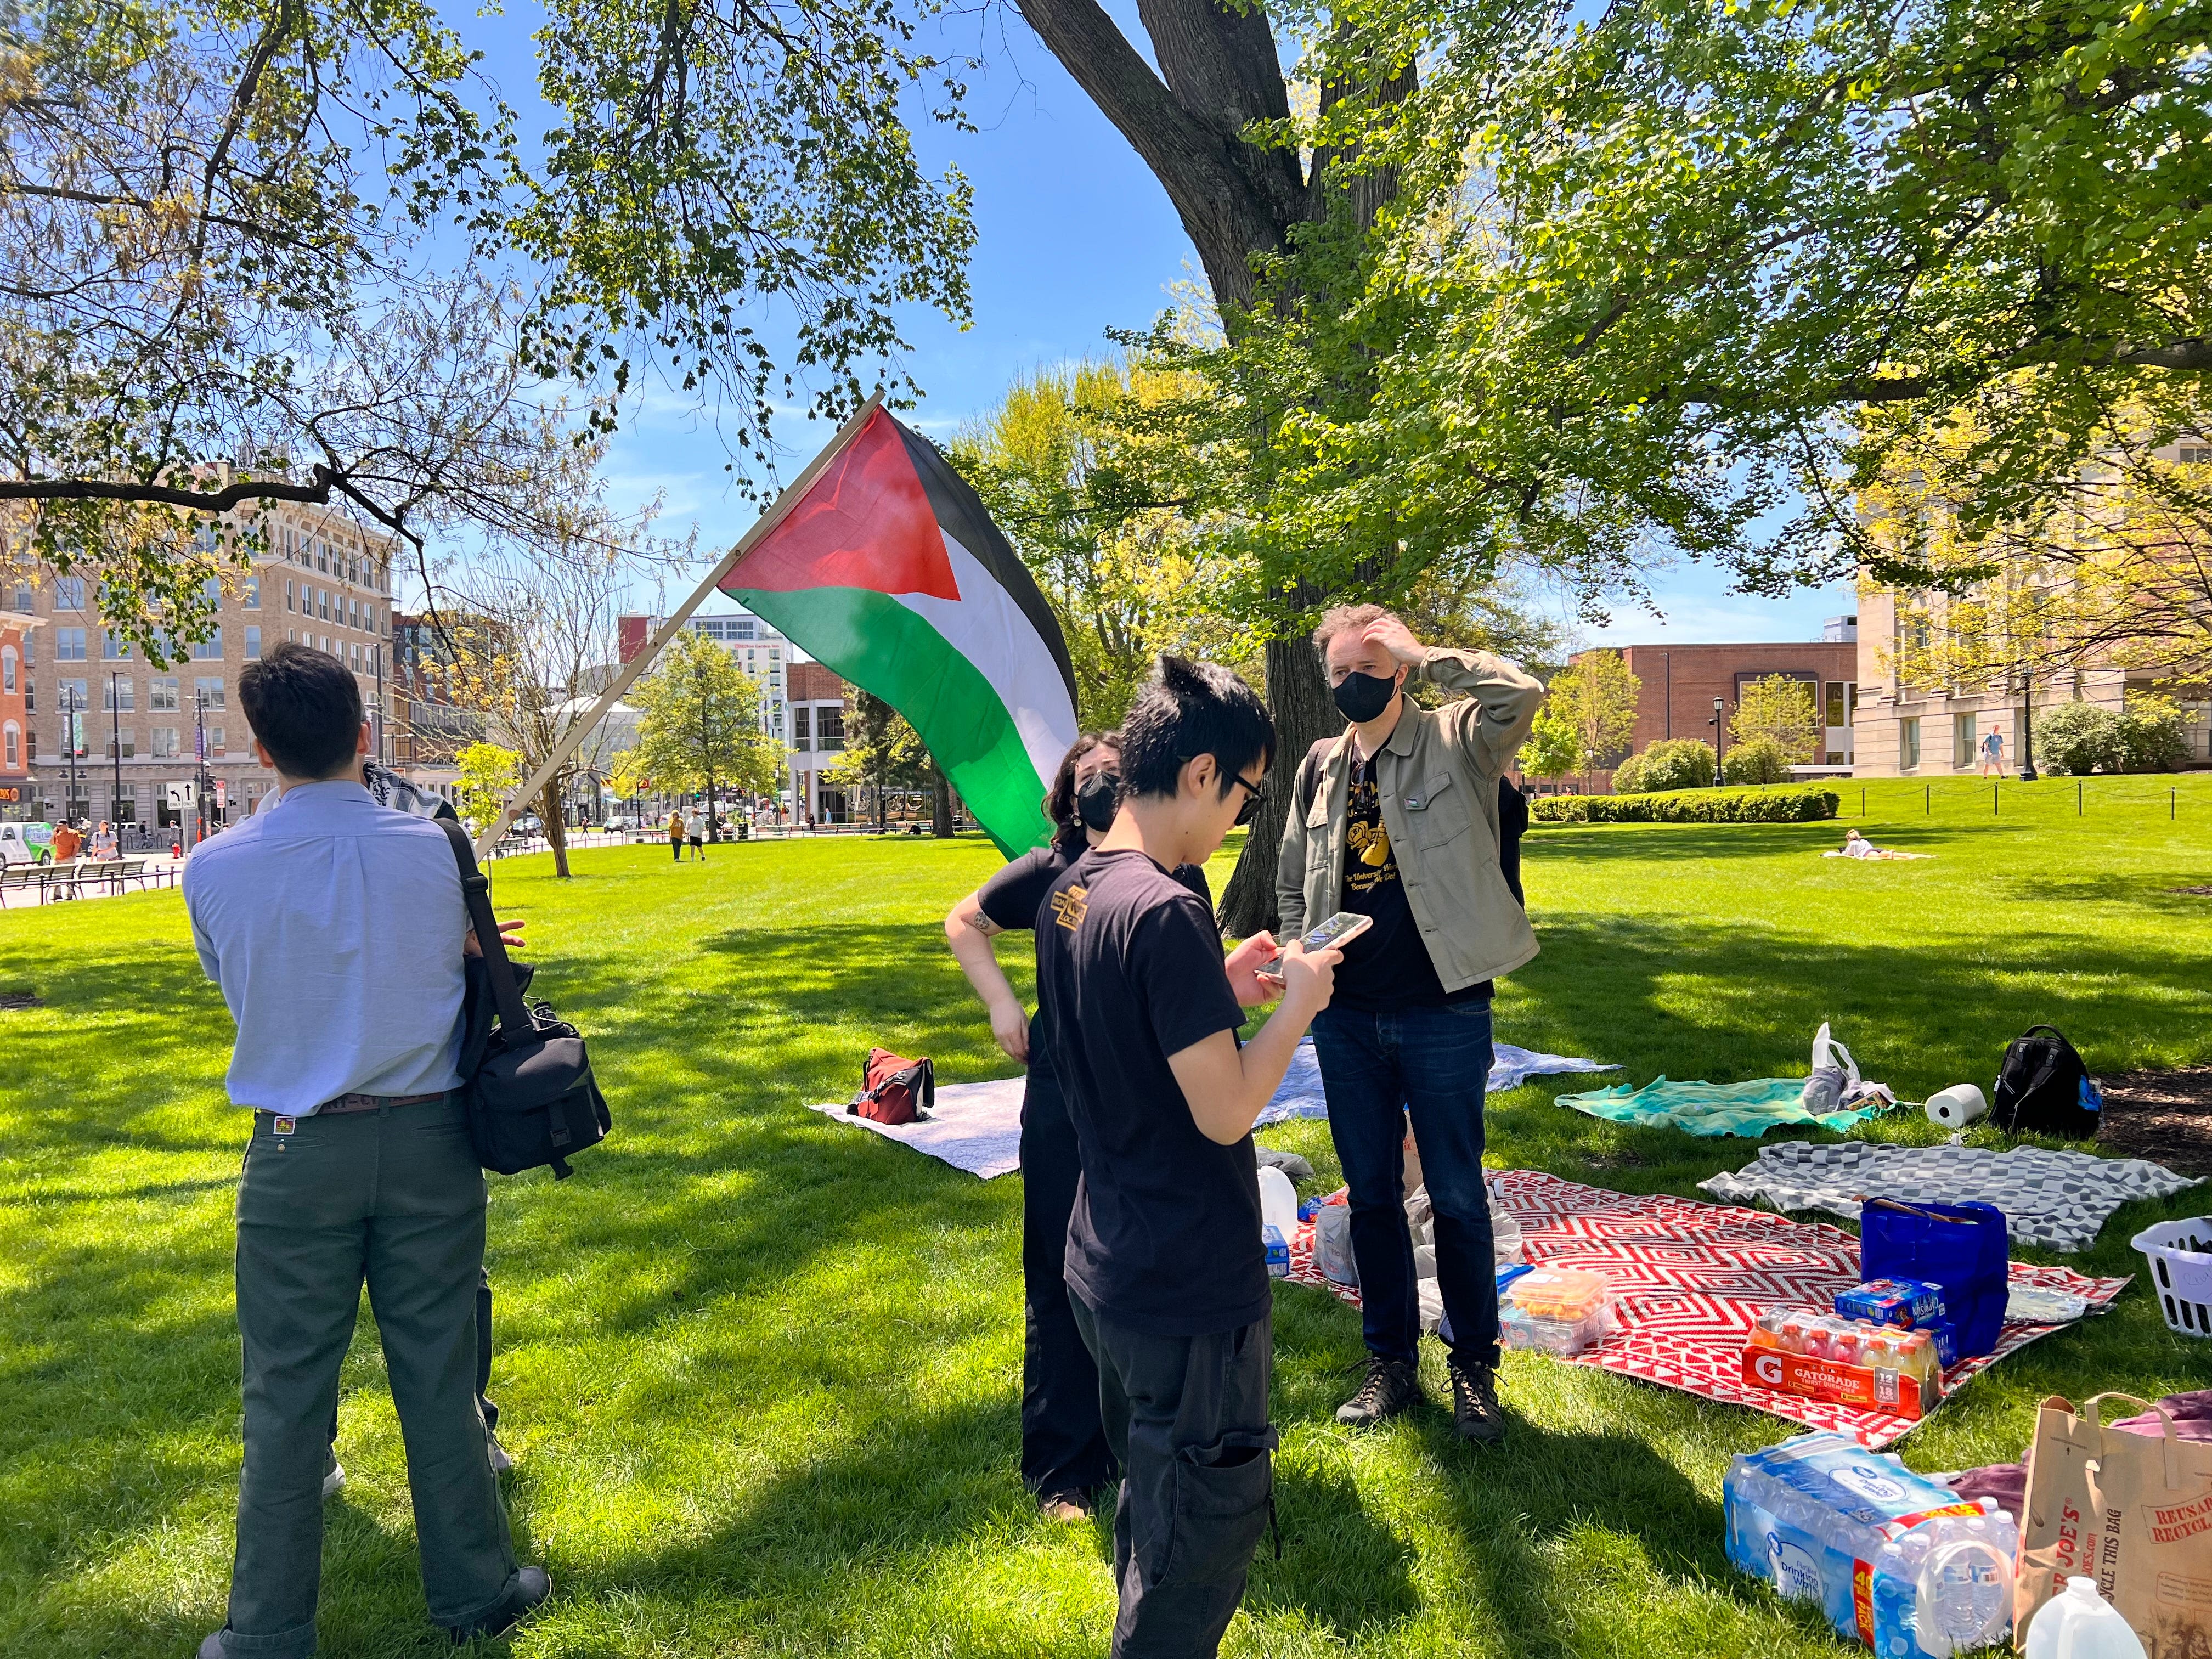 Live updates: Students in Iowa City, University of Iowa lead protests supporting Palestinians